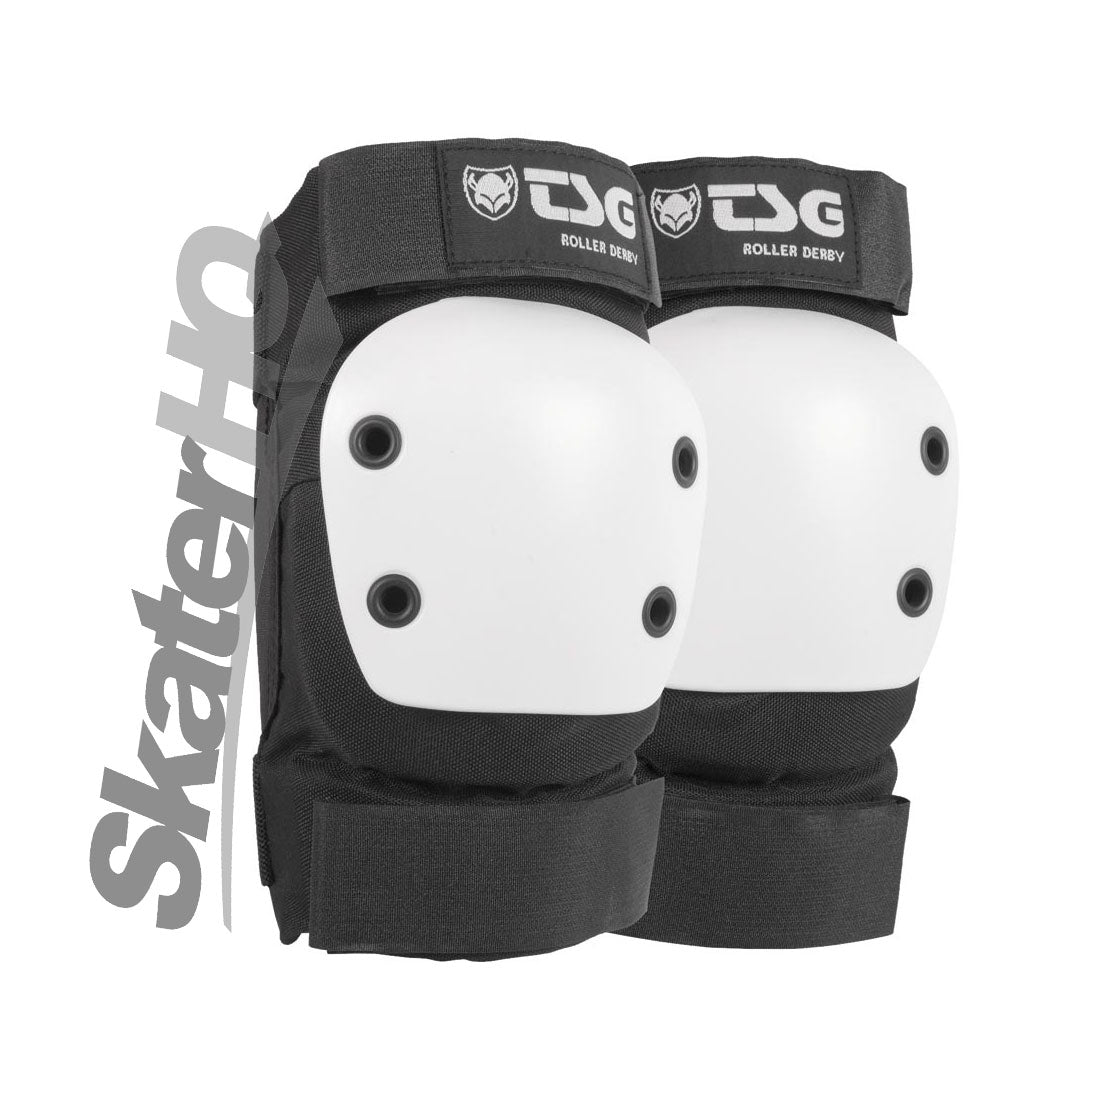 TSG Rollerderby Elbow 2.0 - Small Protective Gear